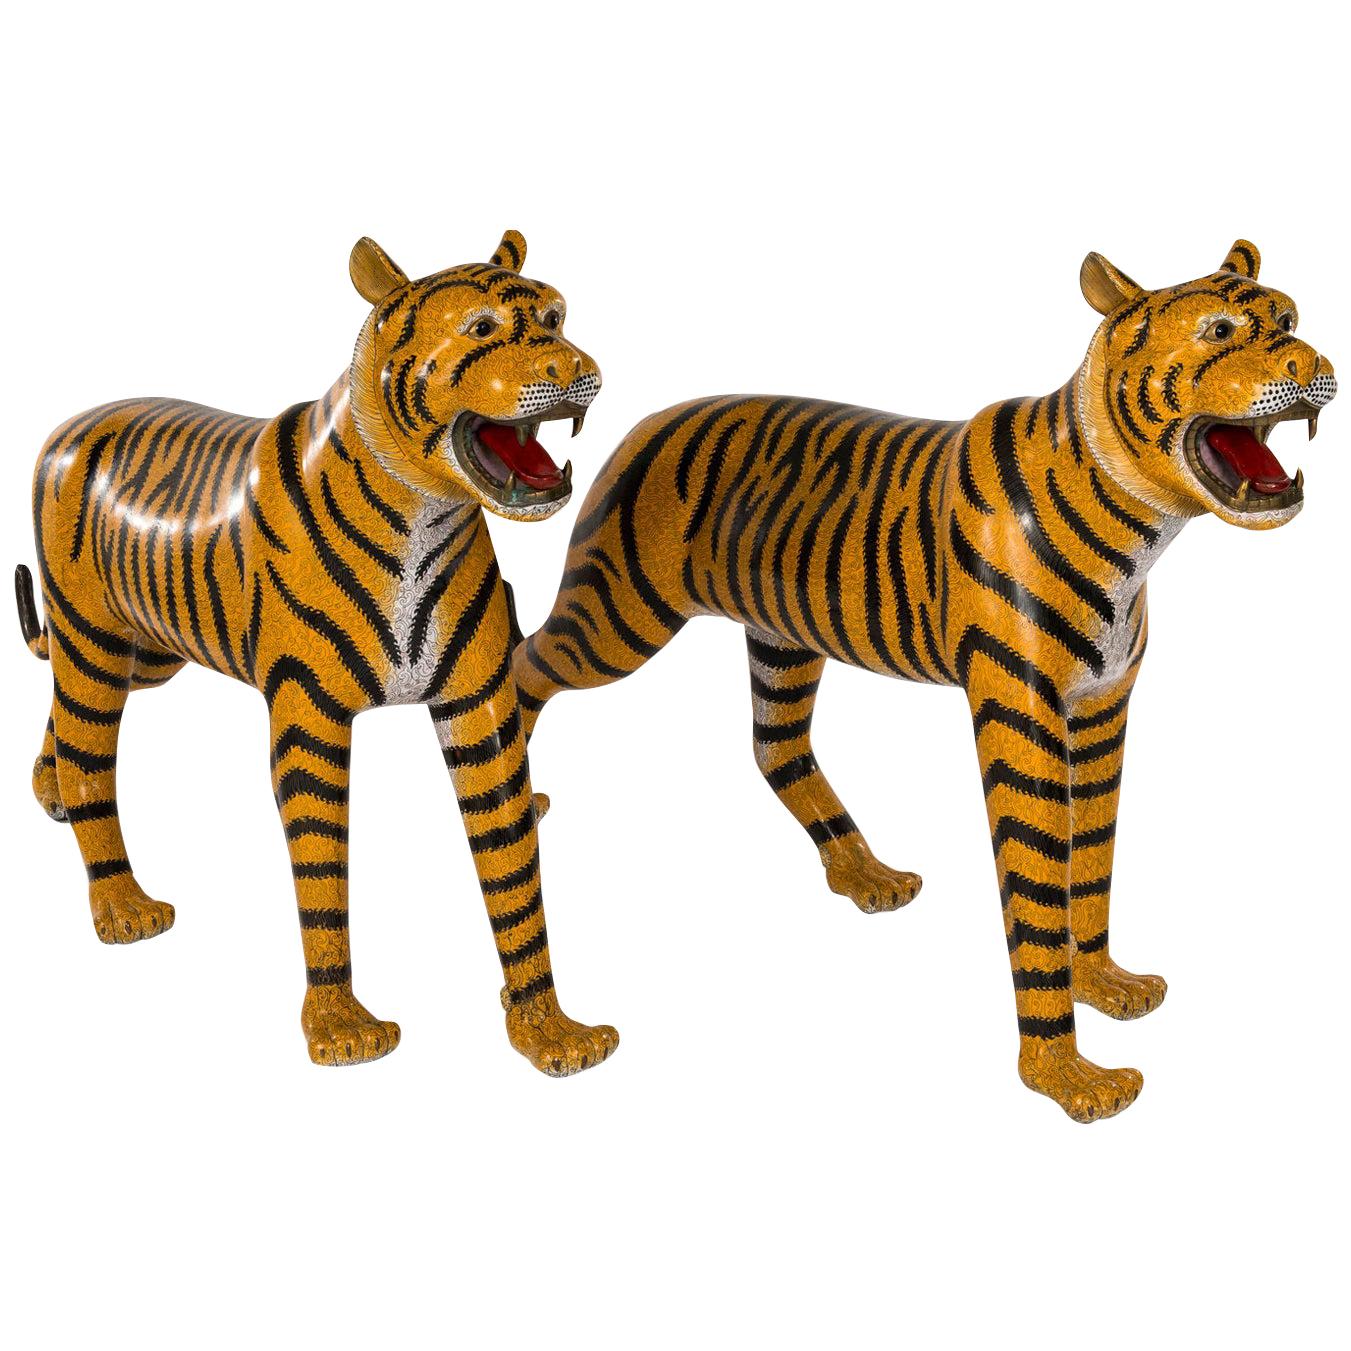 Pair of Chinese Cloisonné Tigers